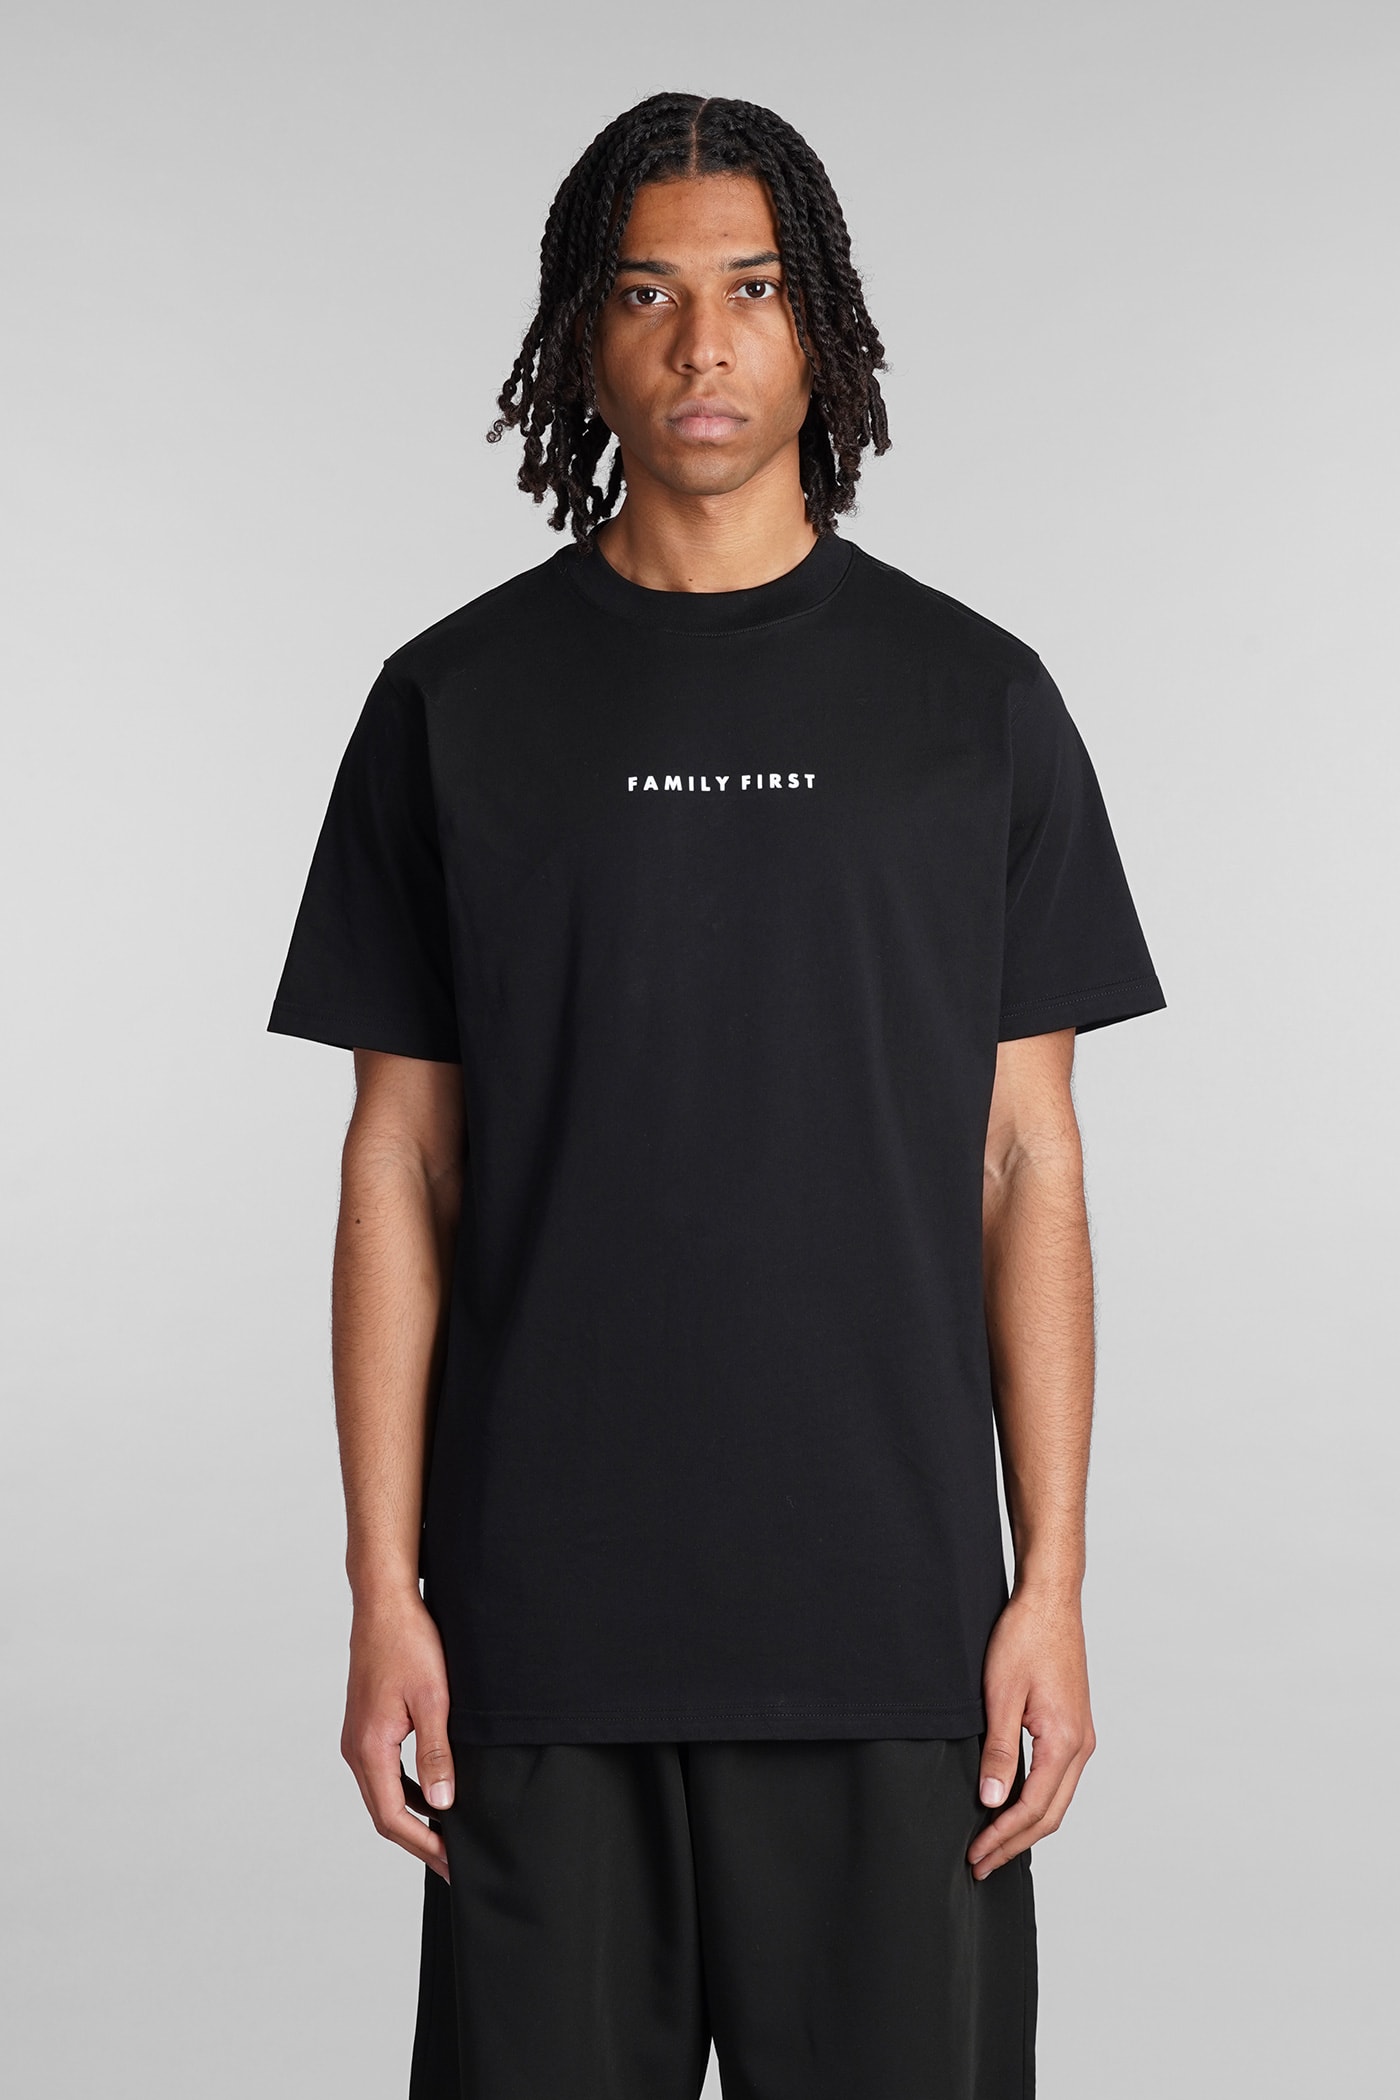 FAMILY FIRST MILANO T-SHIRT IN BLACK COTTON